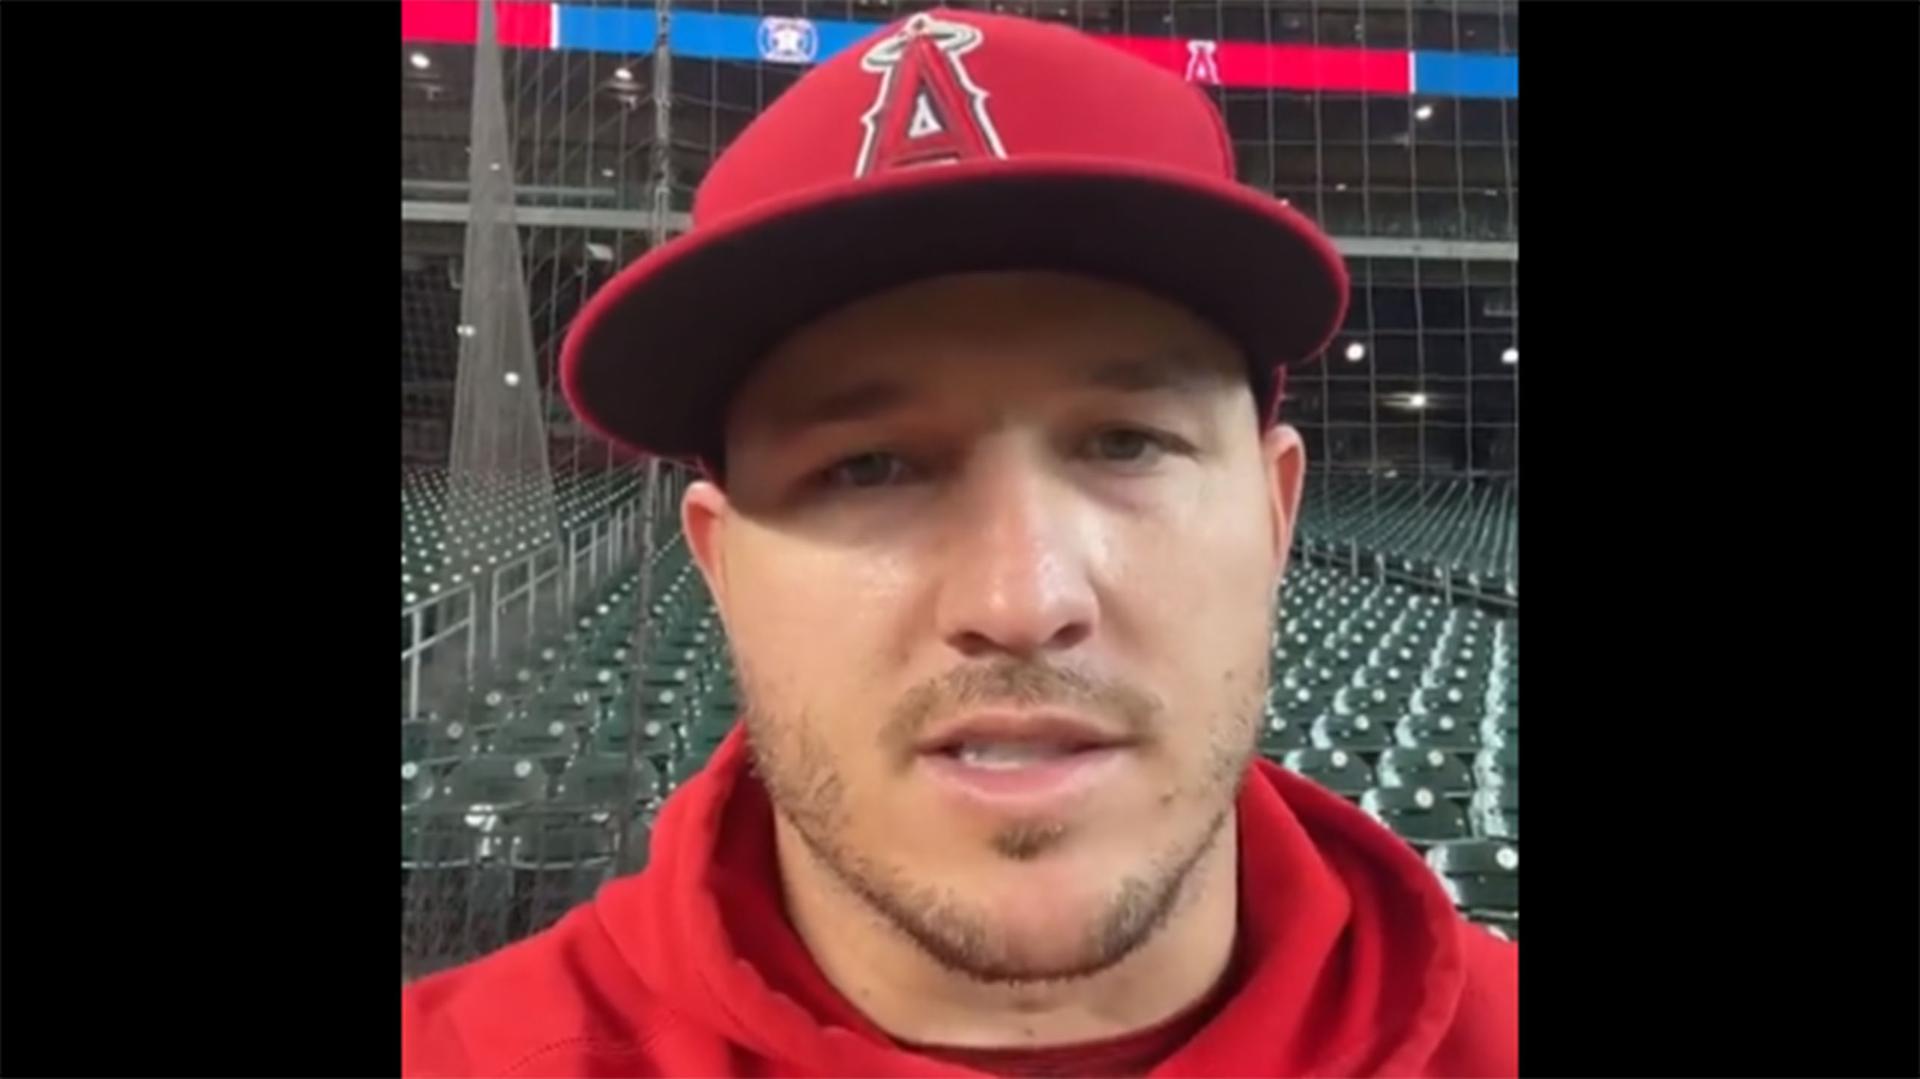 A screengrab of Mike Trout speaking to the camera